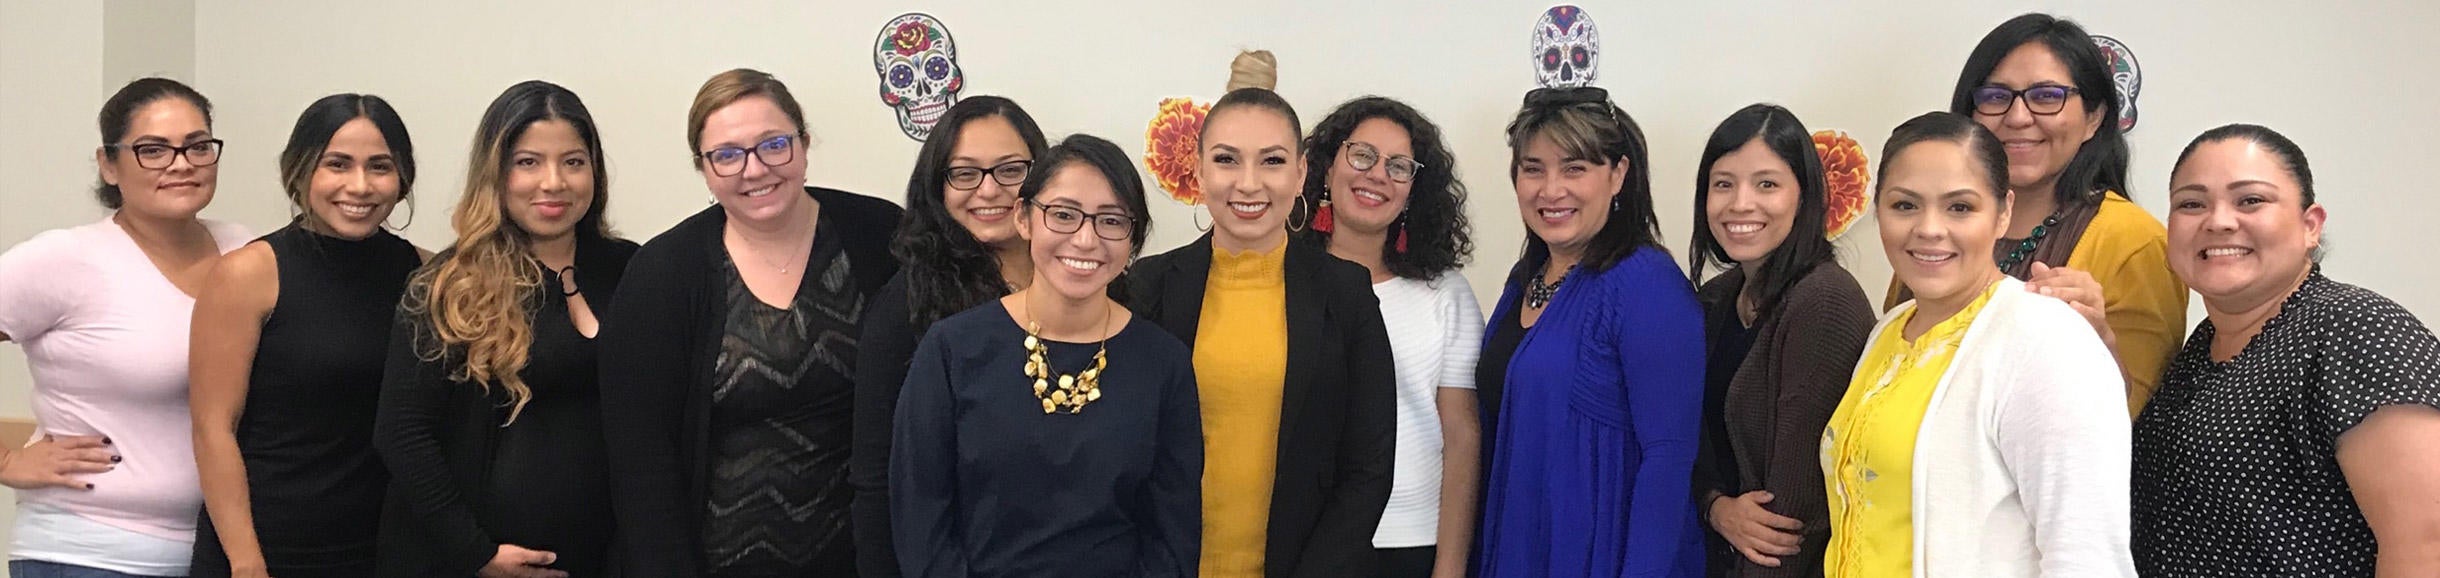 Thirteen female members of the Latina/Chicana Staff and Faculty Group (LCSFG).